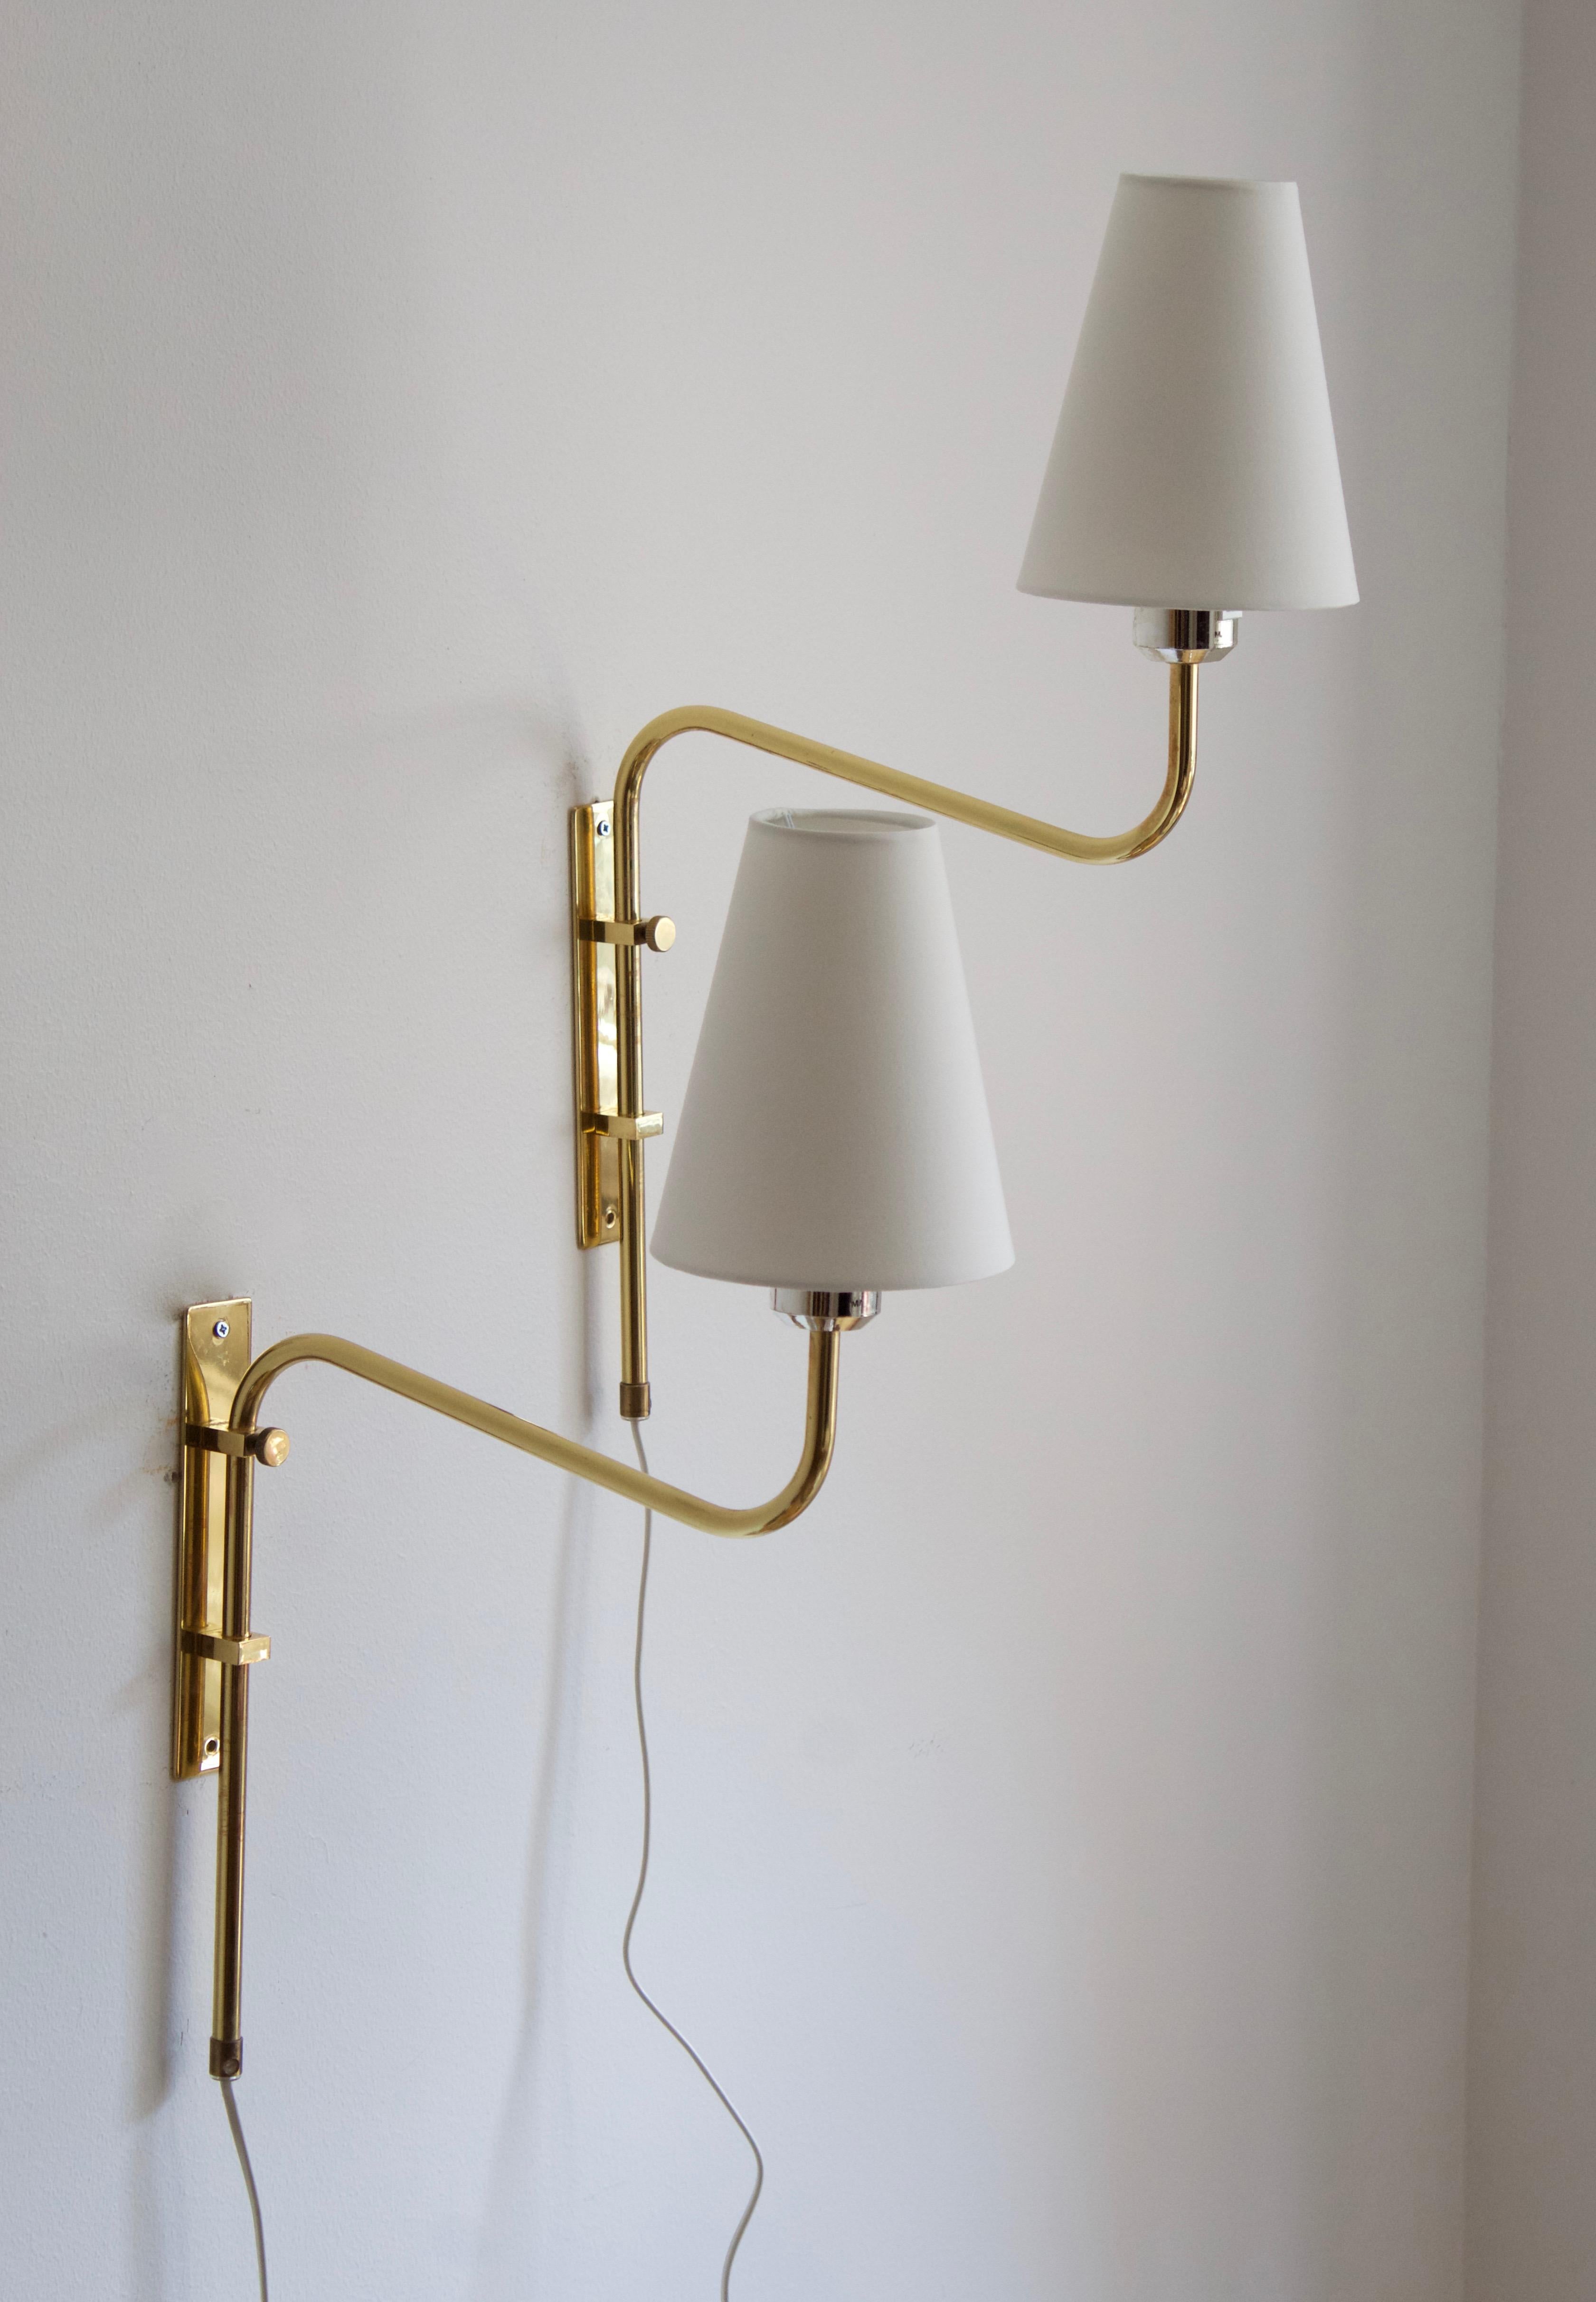 A pair of adjustable wall lights / wall sconces. Designed and produced by Bergboms, Sweden, c. 1970s. Labeled.

Measurements include brand new lampshades illustrated.

Other designers of the period include Paavo Tynell, Hans Bergström, Josef